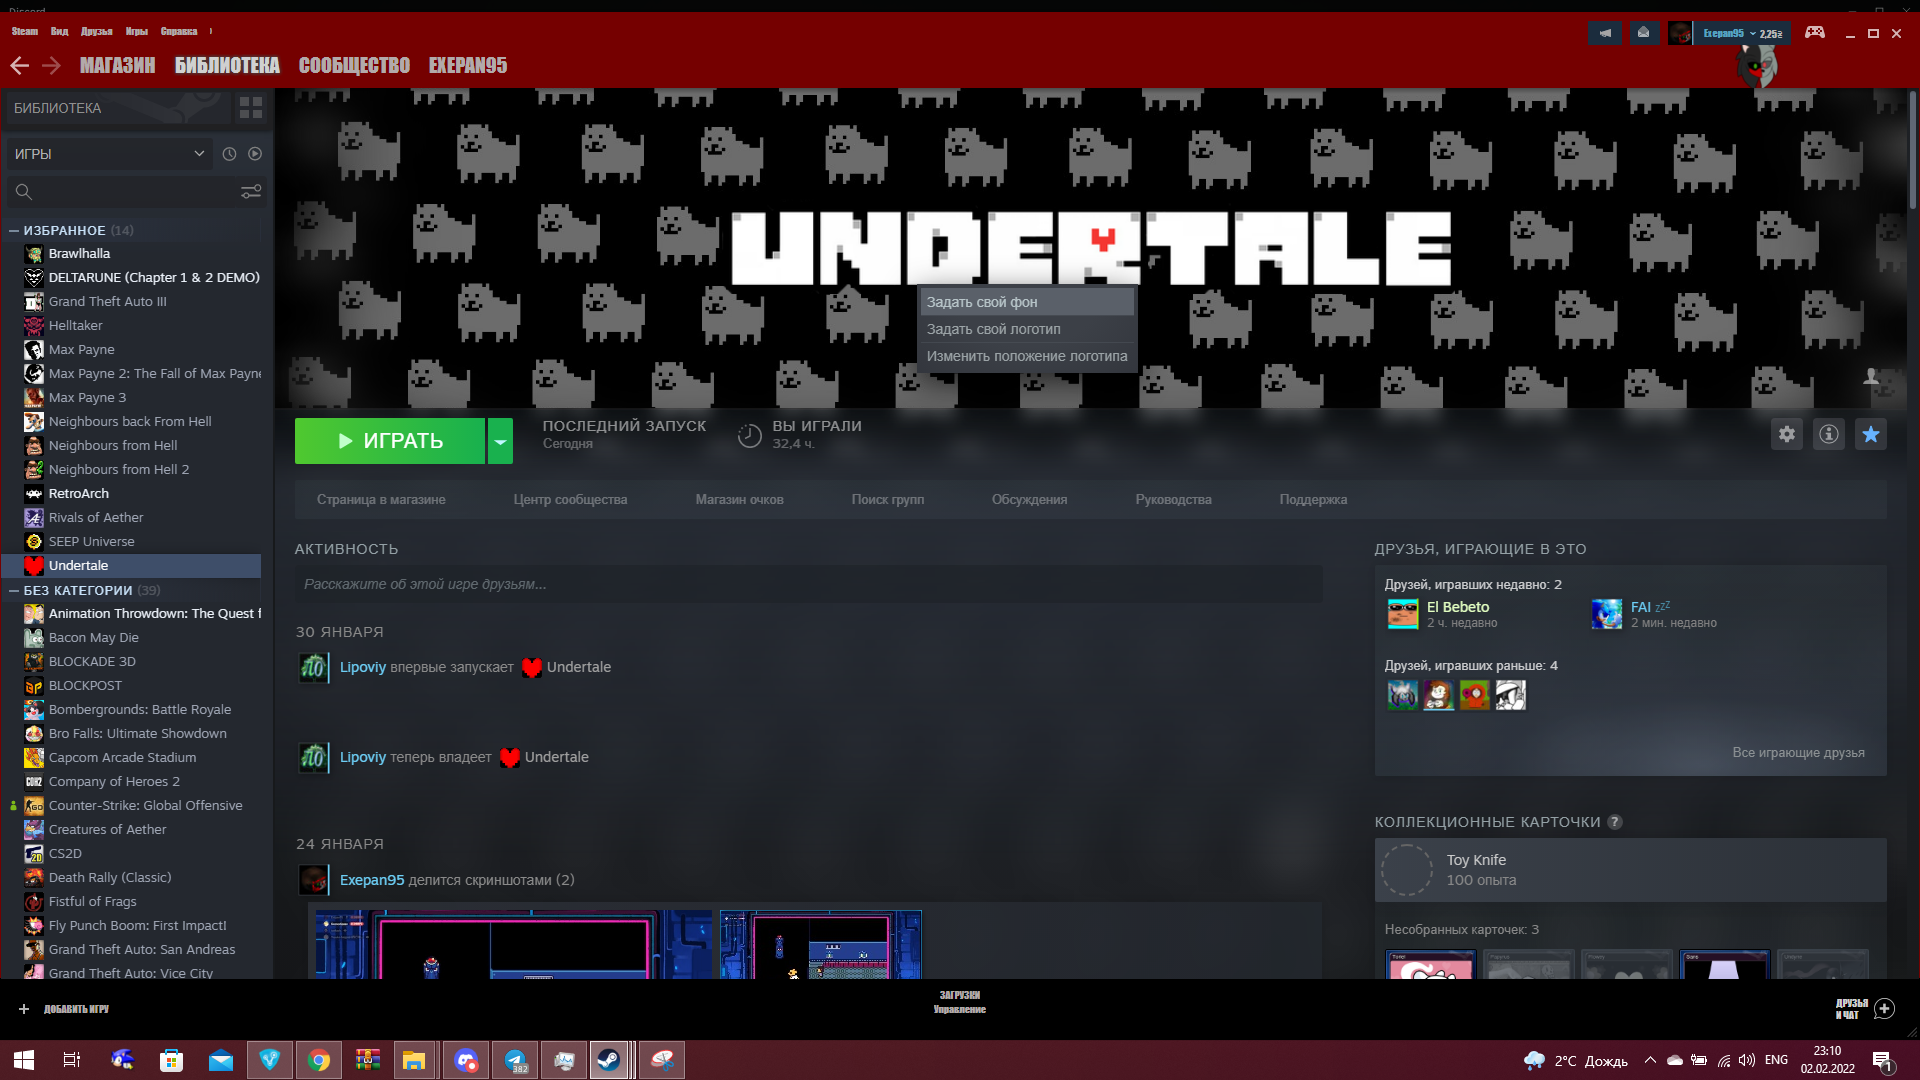 Oficina Steam::Undertale Bits and Pieces